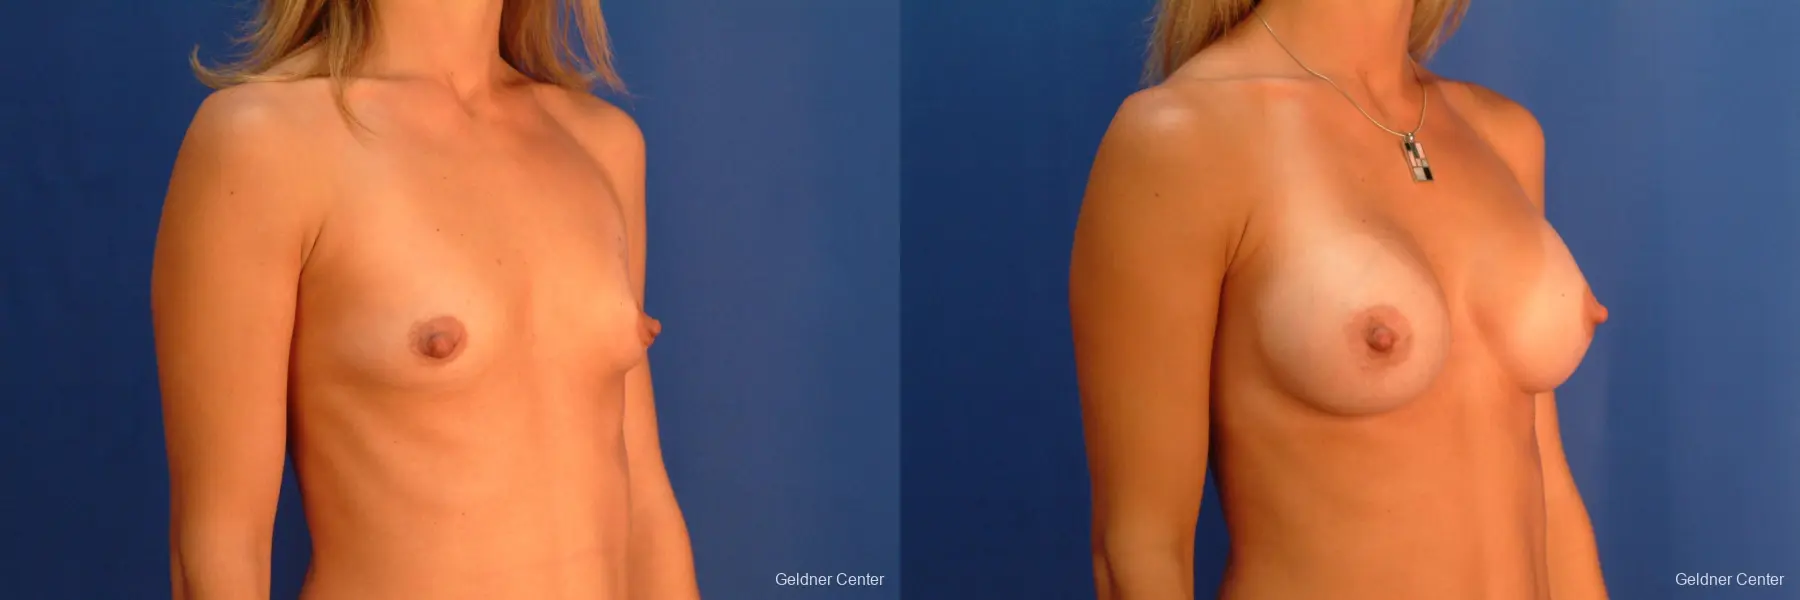 Breast Augmentation Hinsdale, Chicago 2510 - Before and After 3